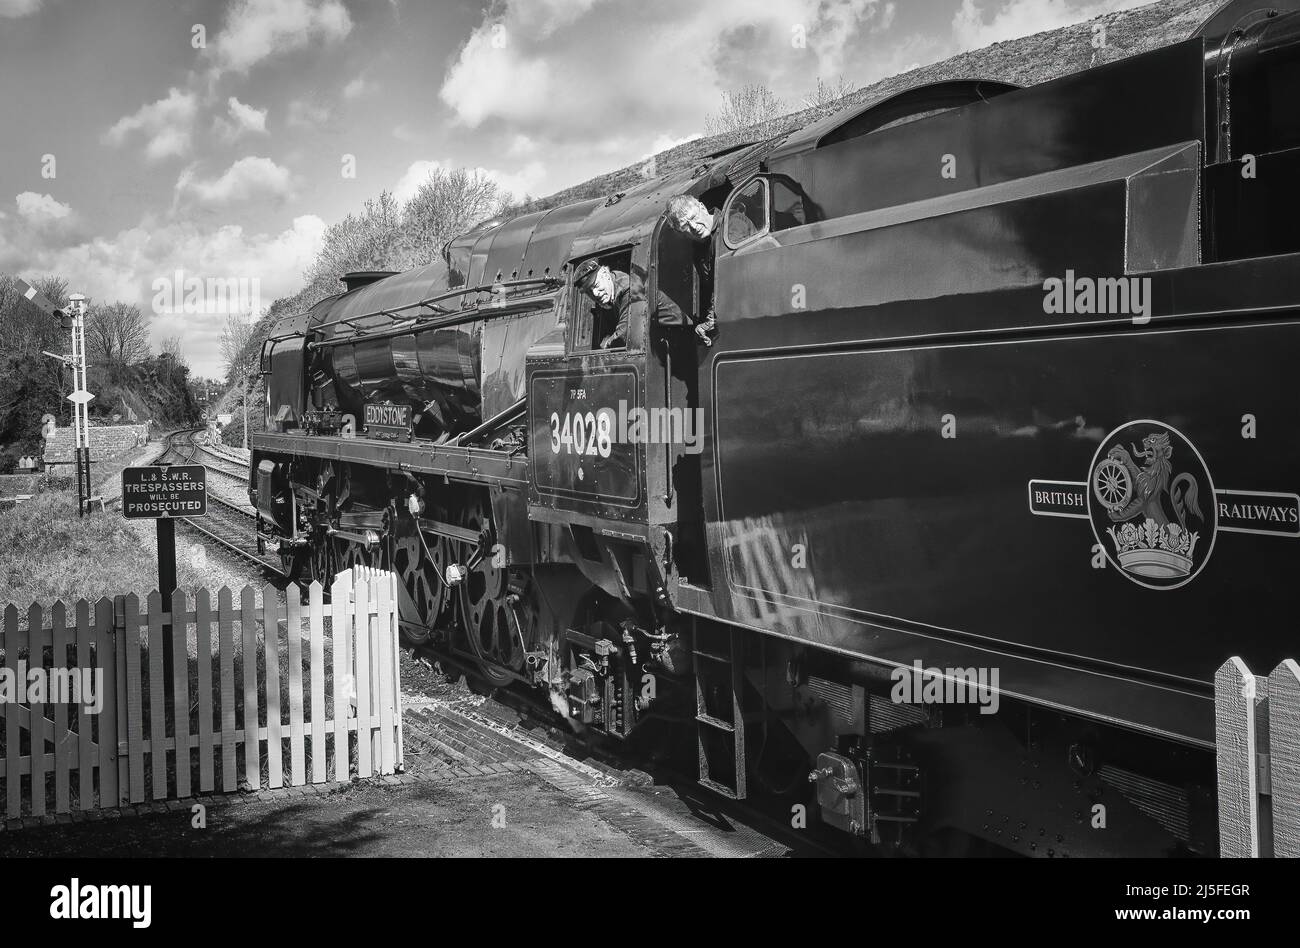 34028 Eddystone - Bulleid Light Pacific Steam Locomotive, currently operational on the Swanage Service, shown here just about to depart Corfe Castle Stock Photo